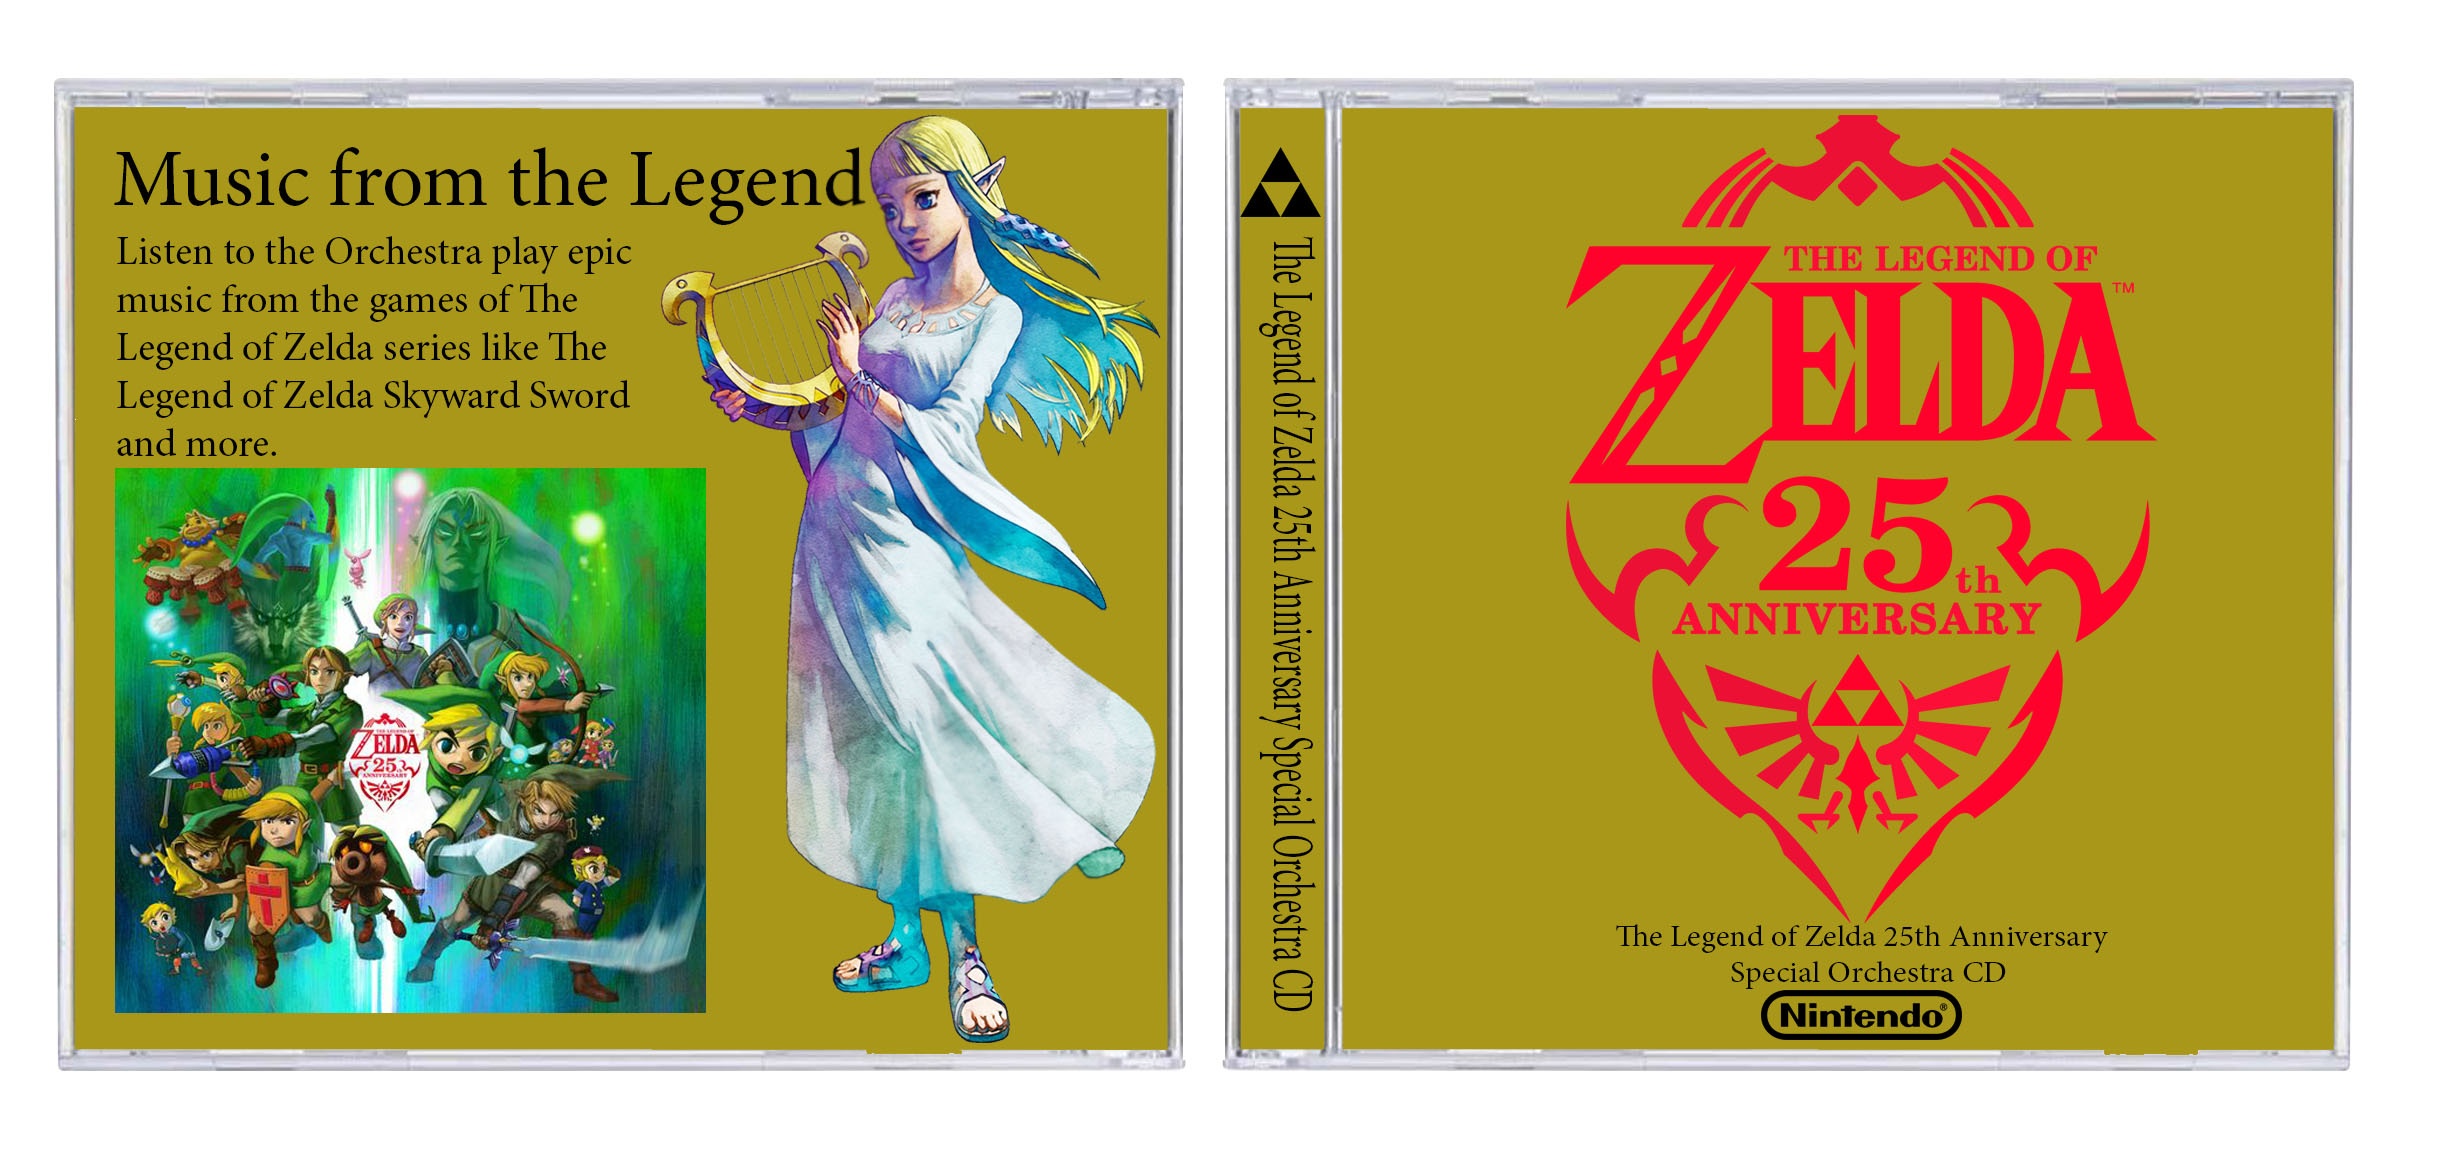 The Legend of Zelda Special Orchestra CD Case box cover